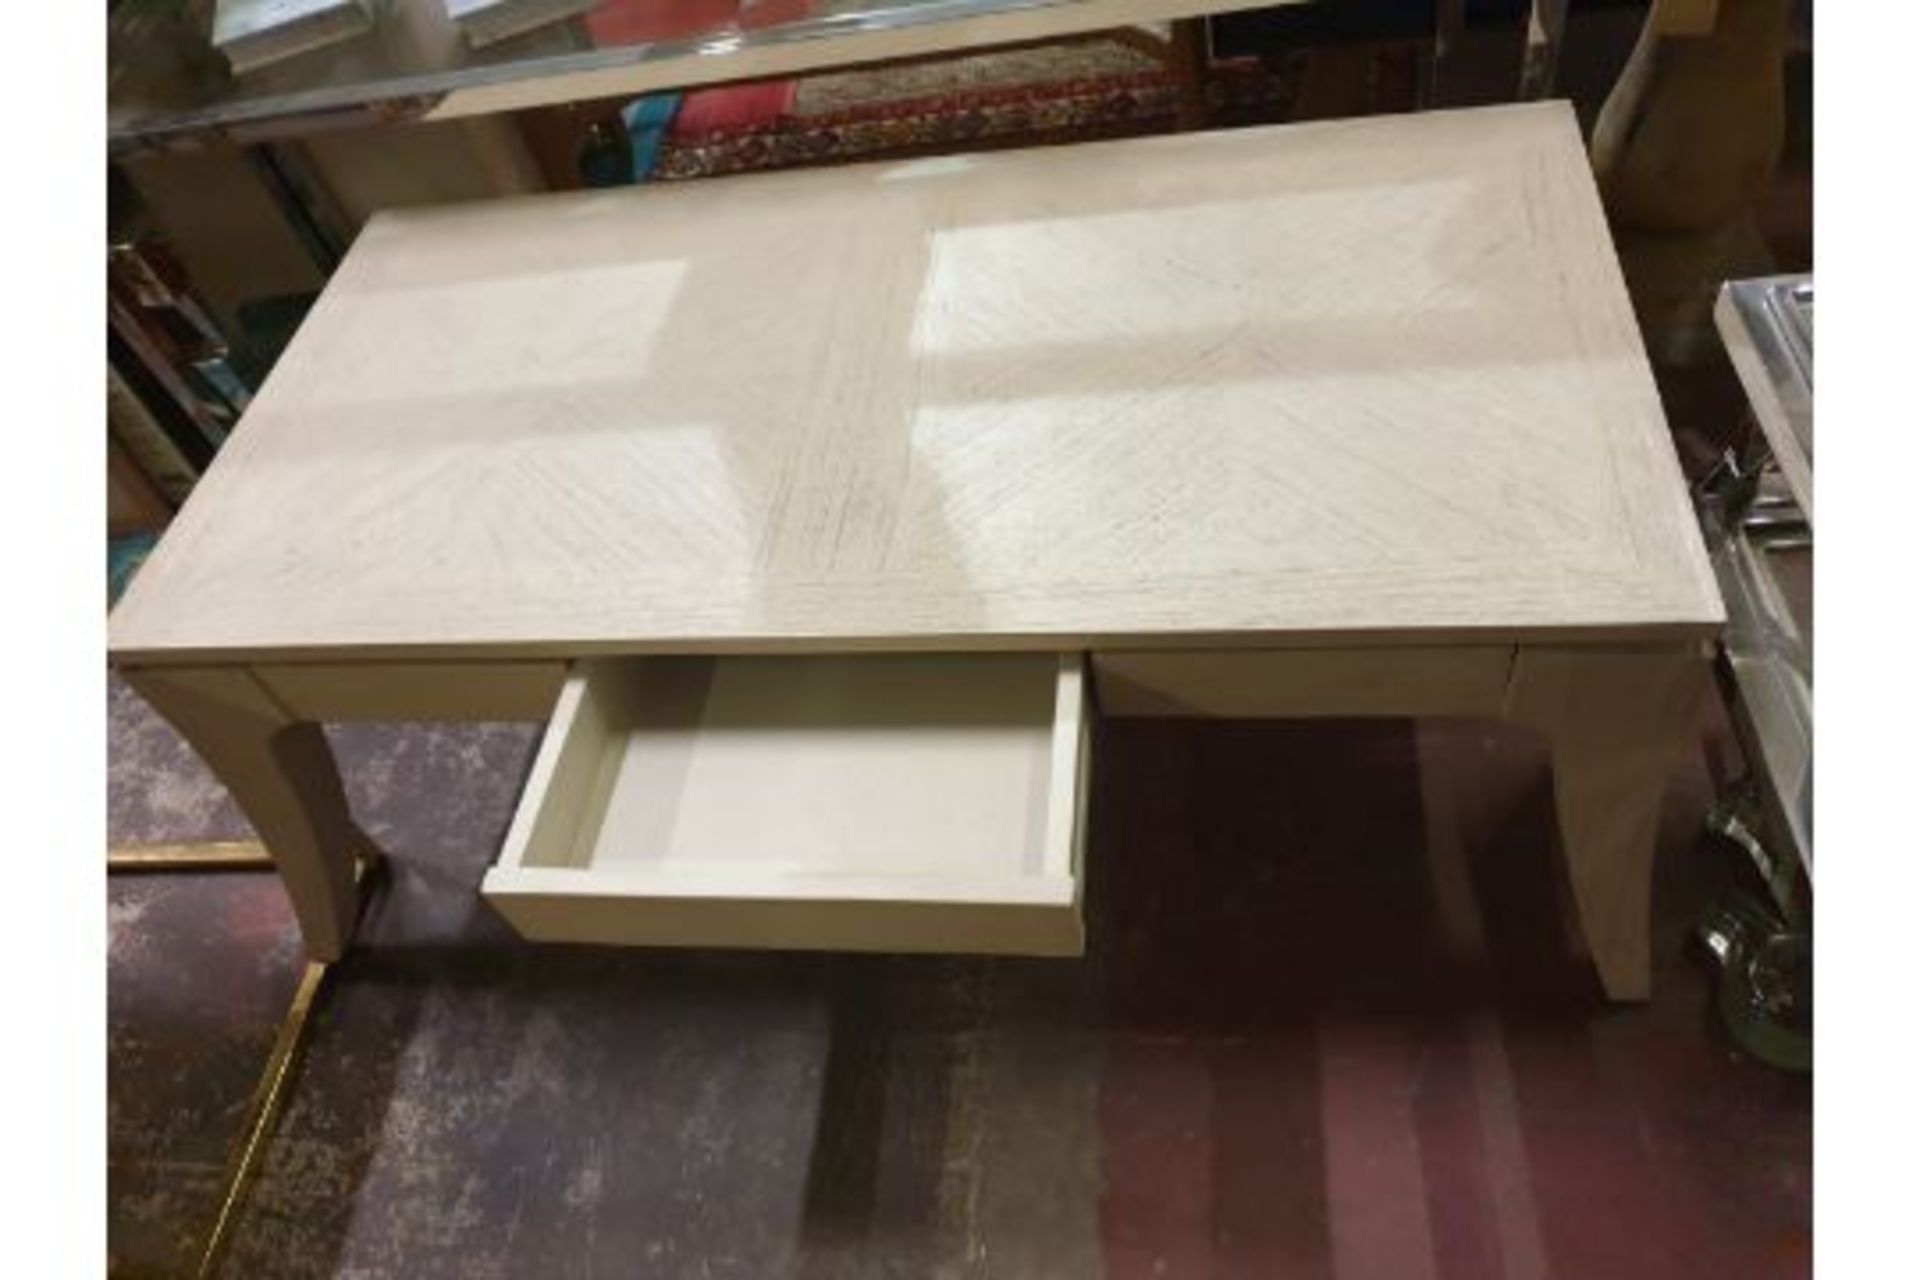 Wooden Coffee Table With Drawer W 1200mm D 600mm H 450mm Split On Side Shelf SR168 Ex Display - Image 2 of 2